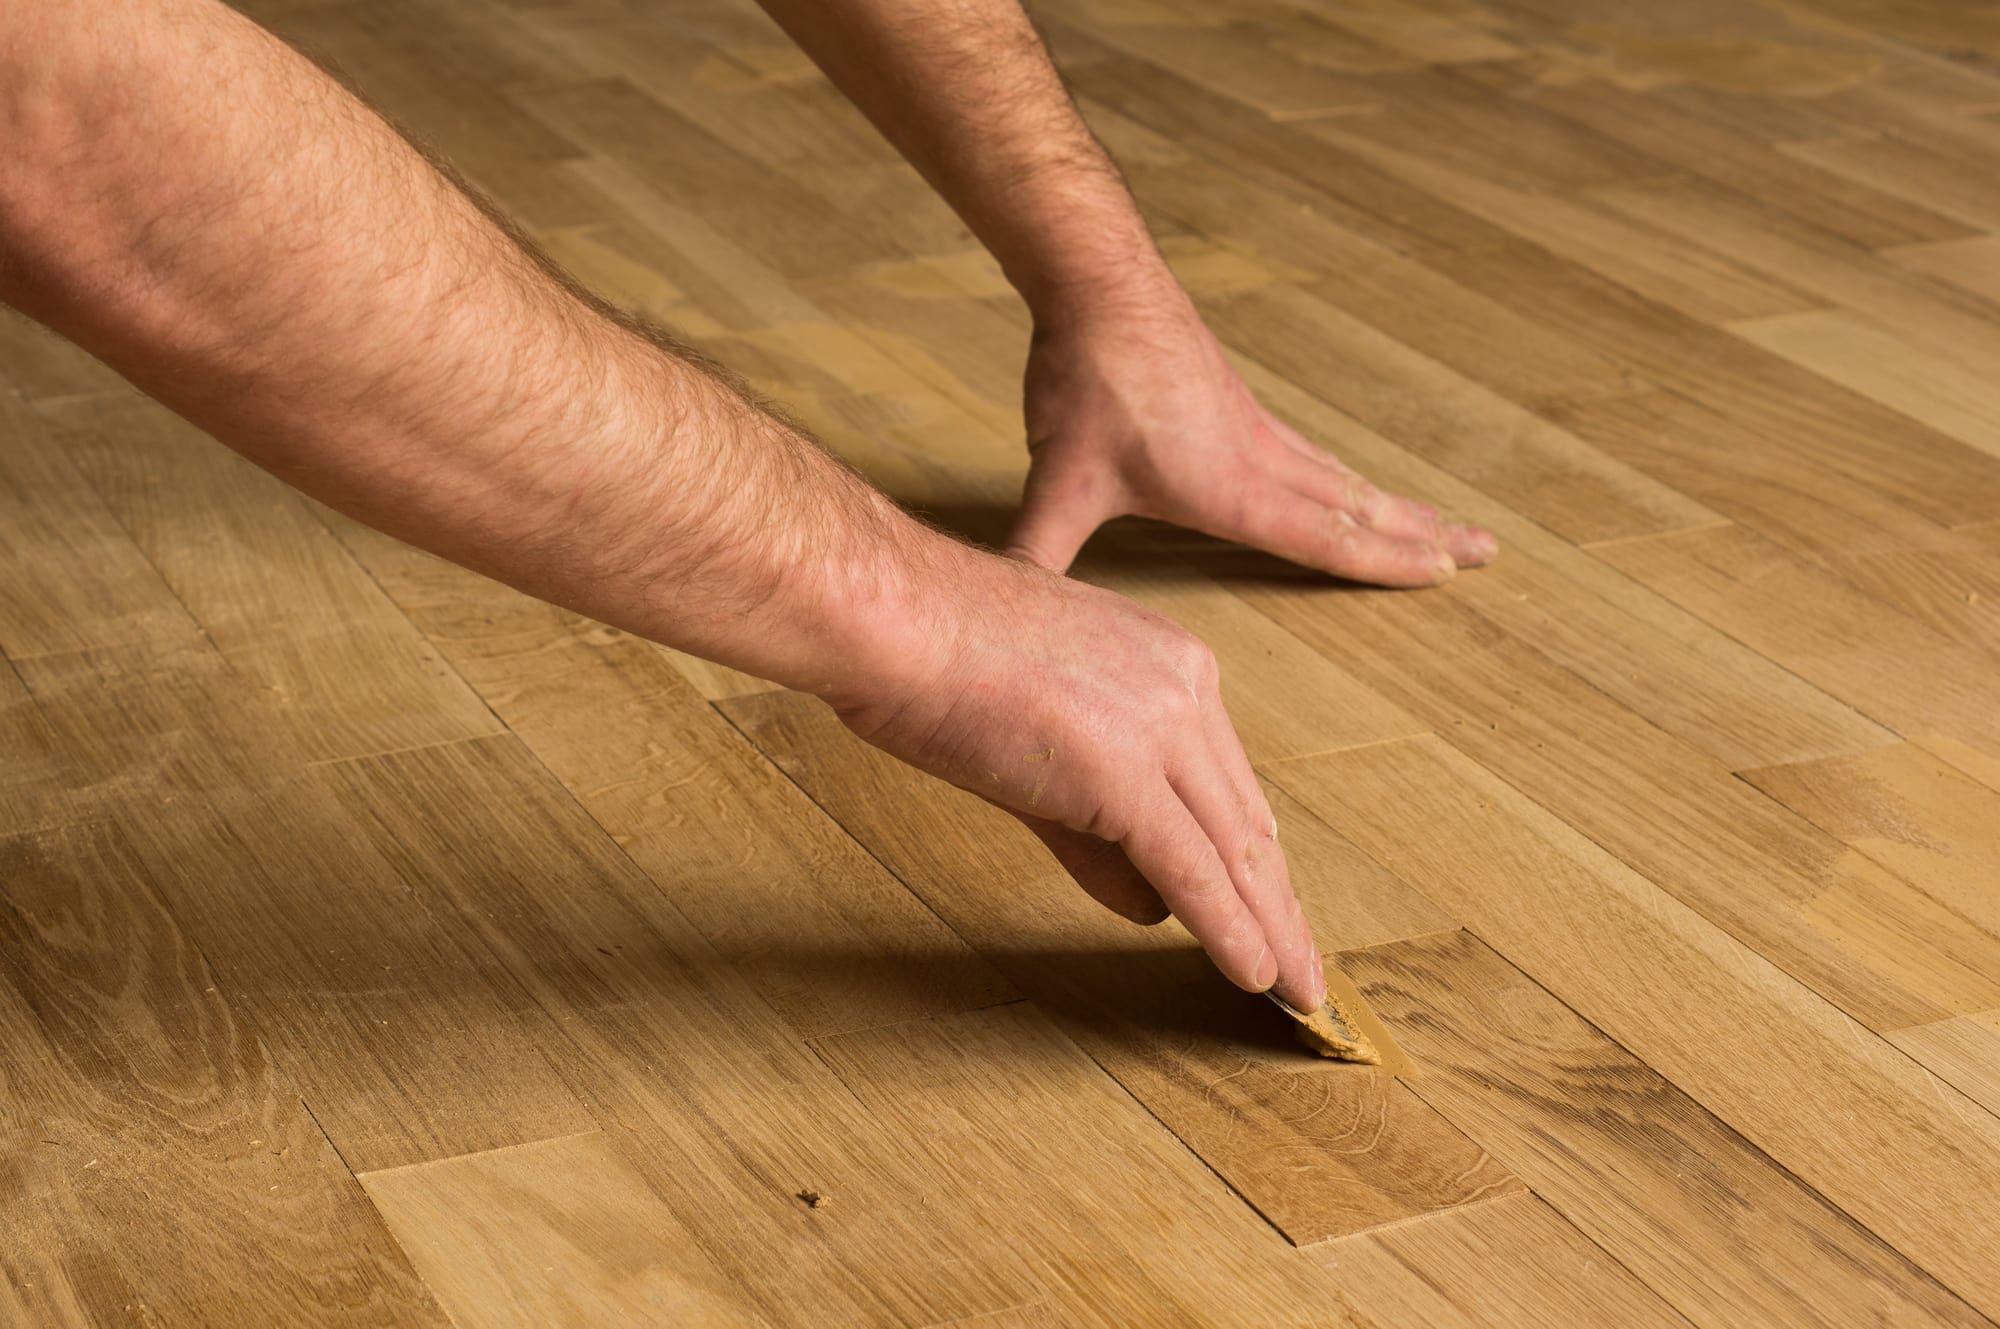 How to do Minor Floorboard Repairs - Markan Hardwood Plus How Dry Should Wood Be Before Turning